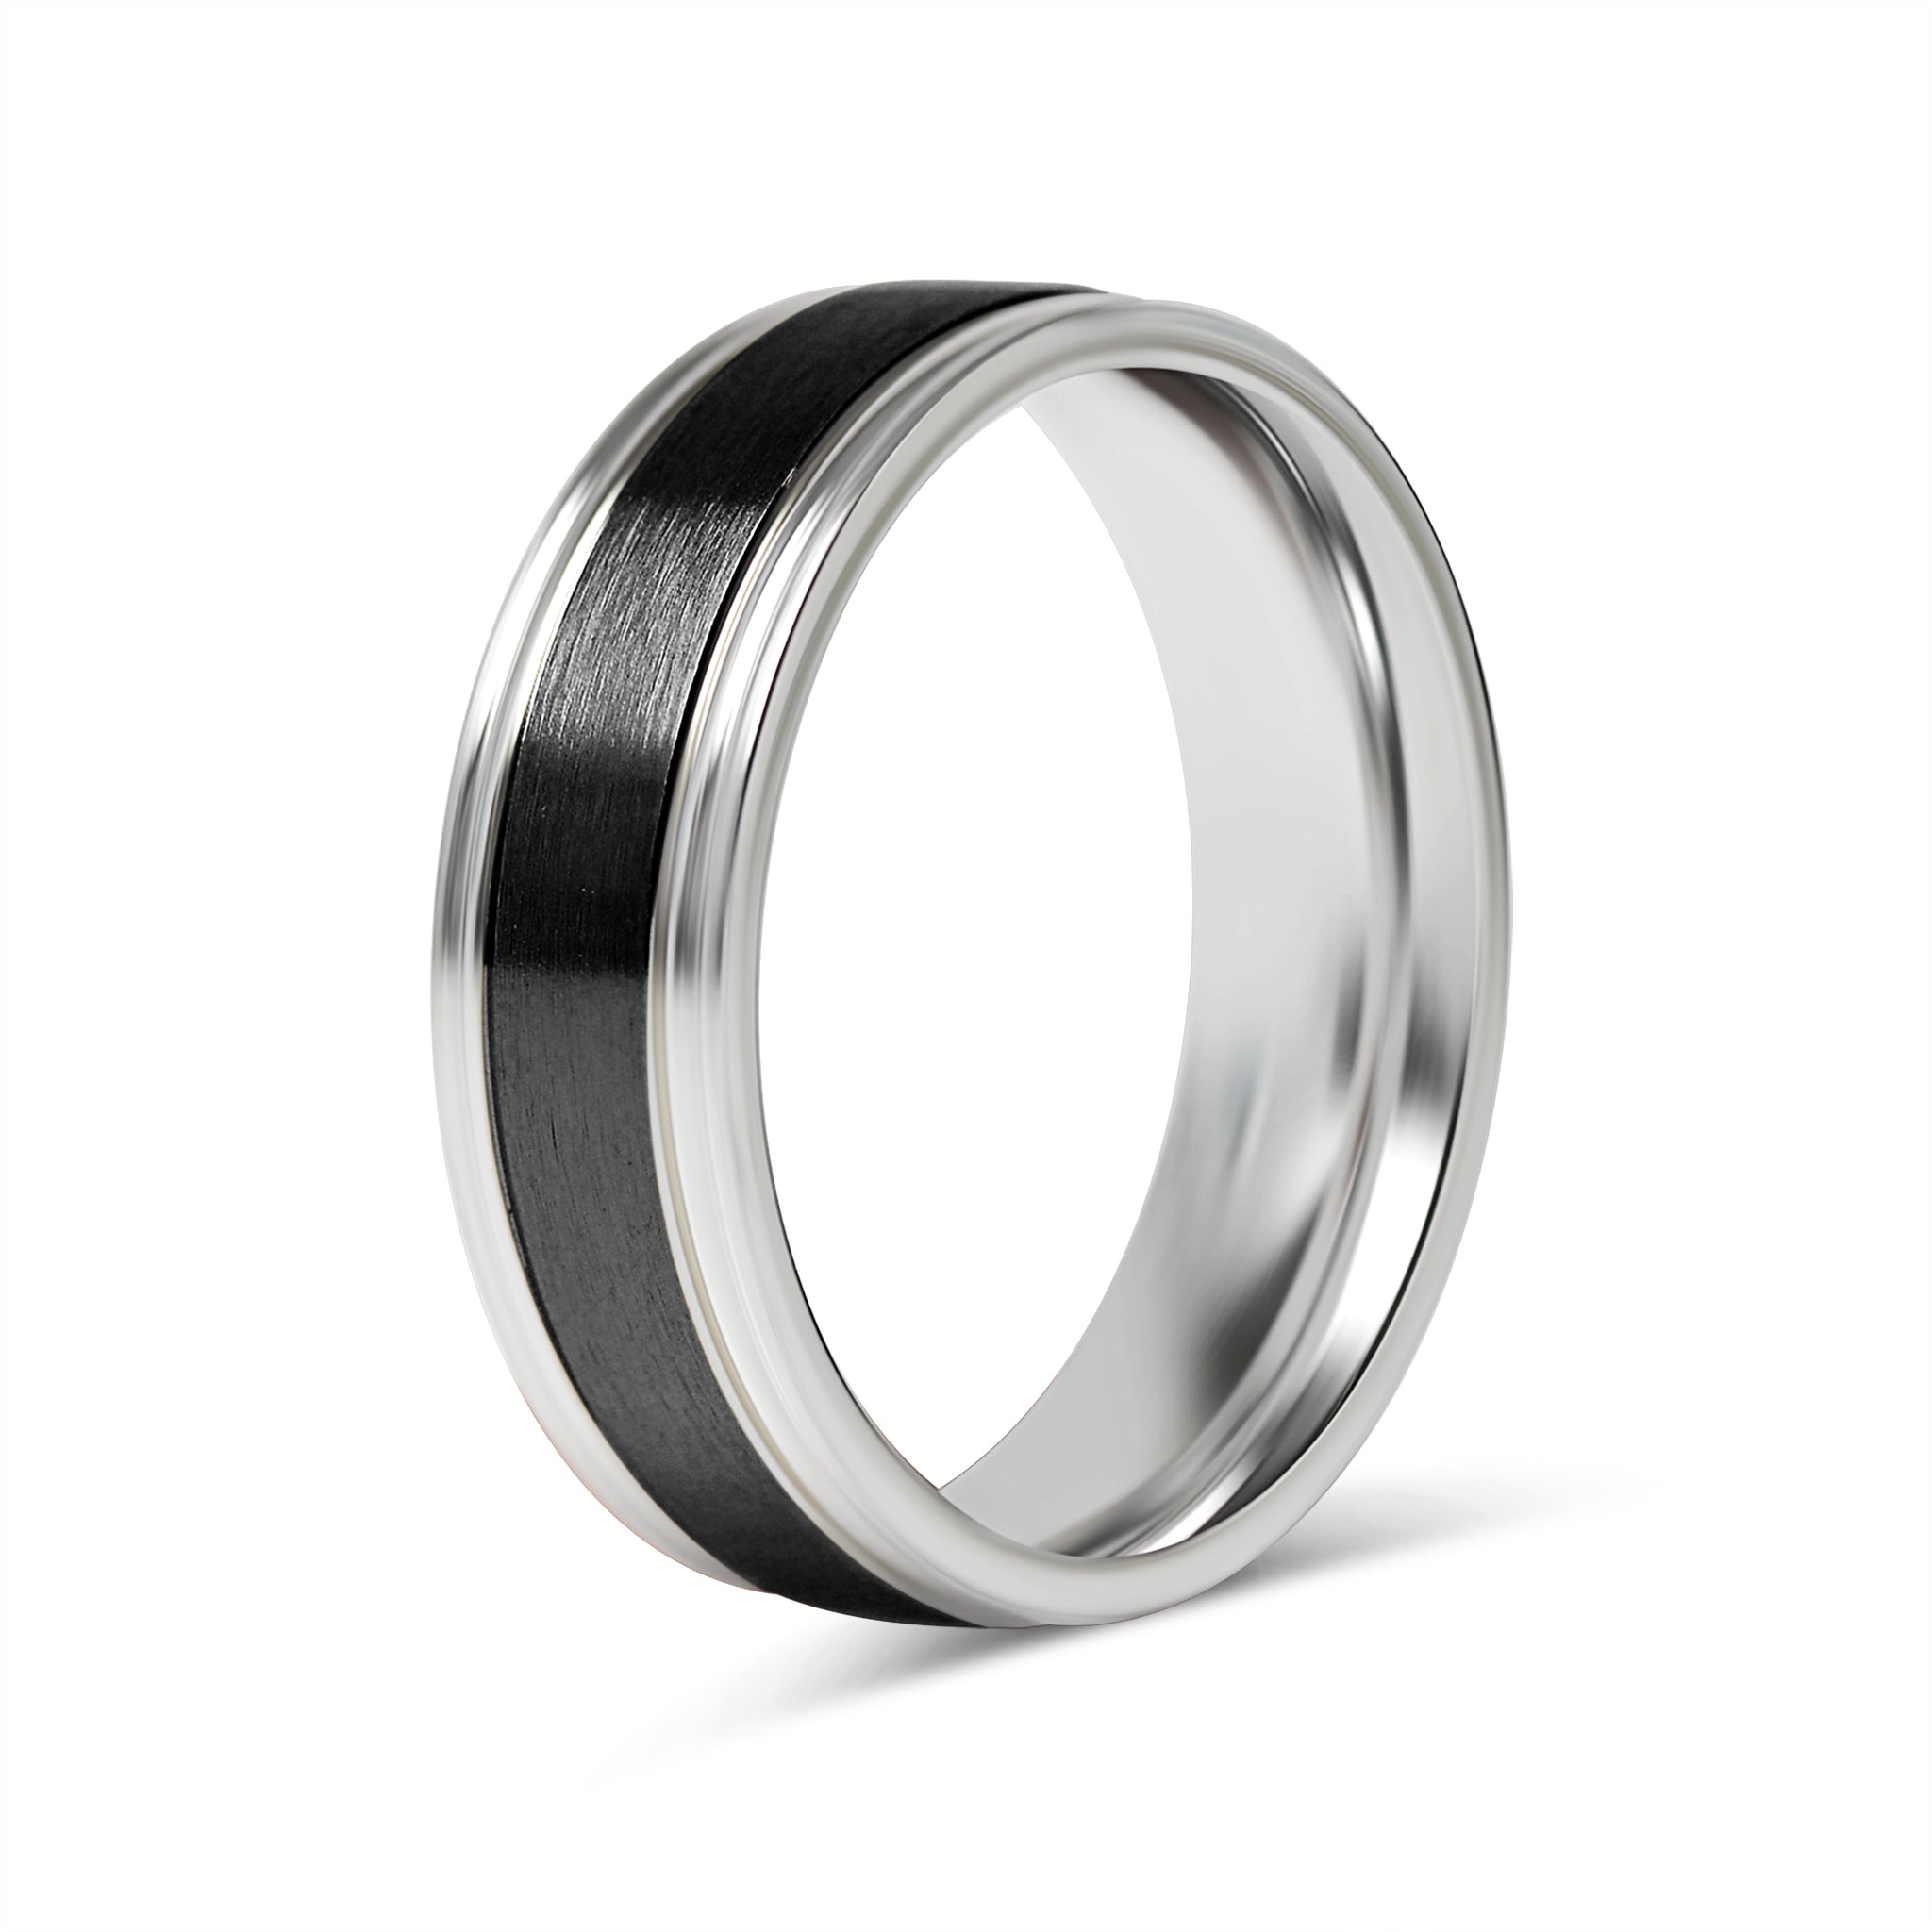 Rings Black Center Polished Stainless Steel Ring Cfr7028 6mm / 7 Wholesale Jewelry Website 7 Unisex